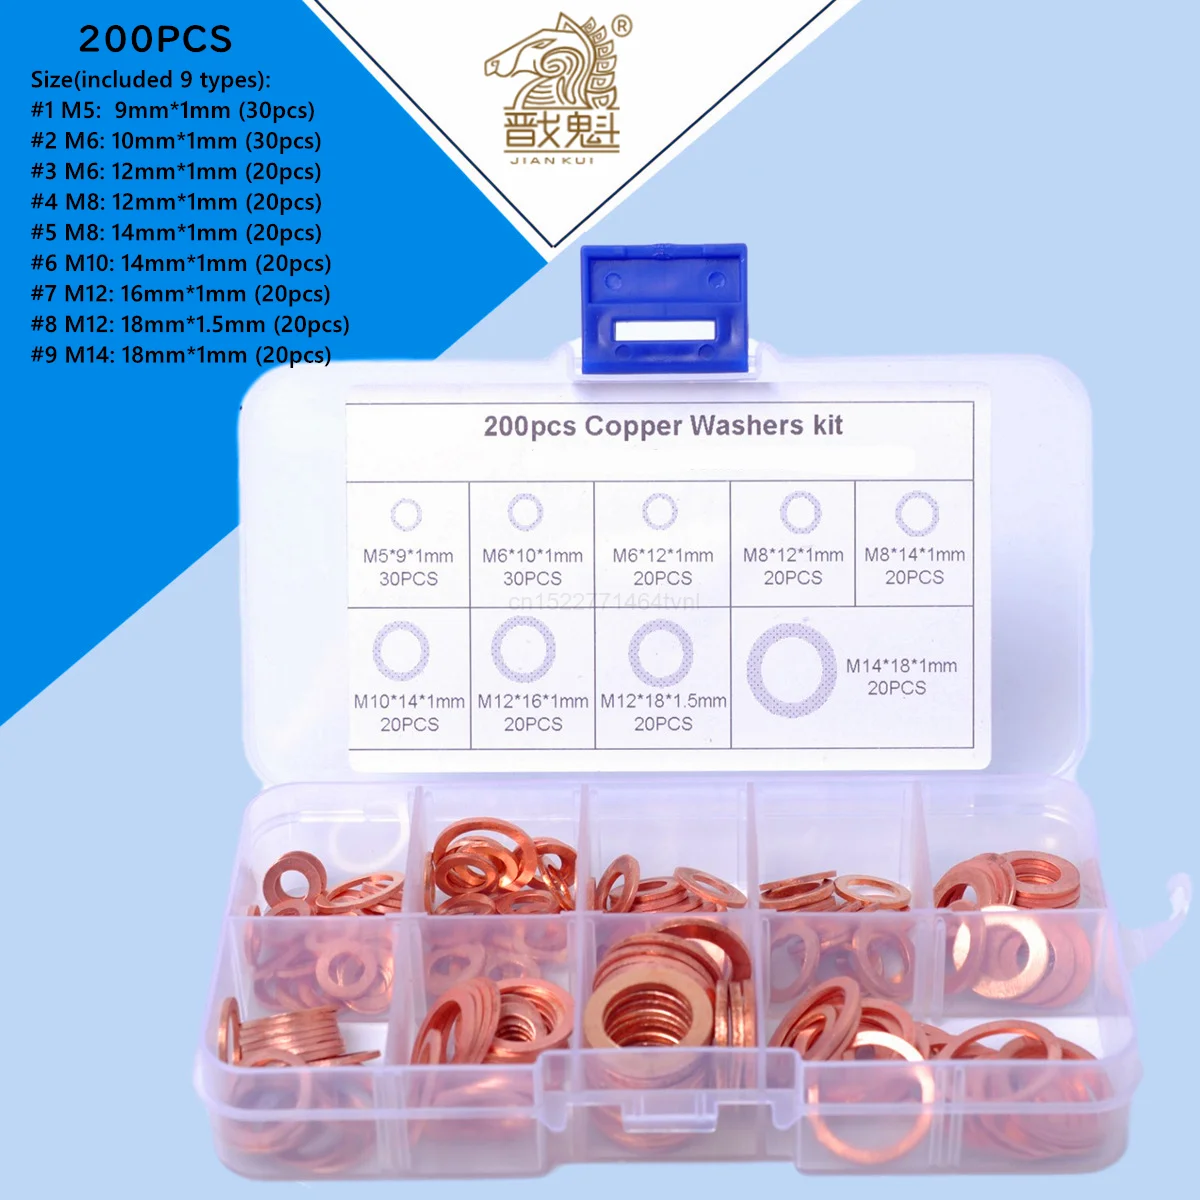 JINSUO LYDBM 200Pcs Copper Washer Gasket Nut and Bolt Set Flat Ring Seal Assortment Kit with Box M5/M6/M8/M10/M12/M14 for Sump Plugs Water 